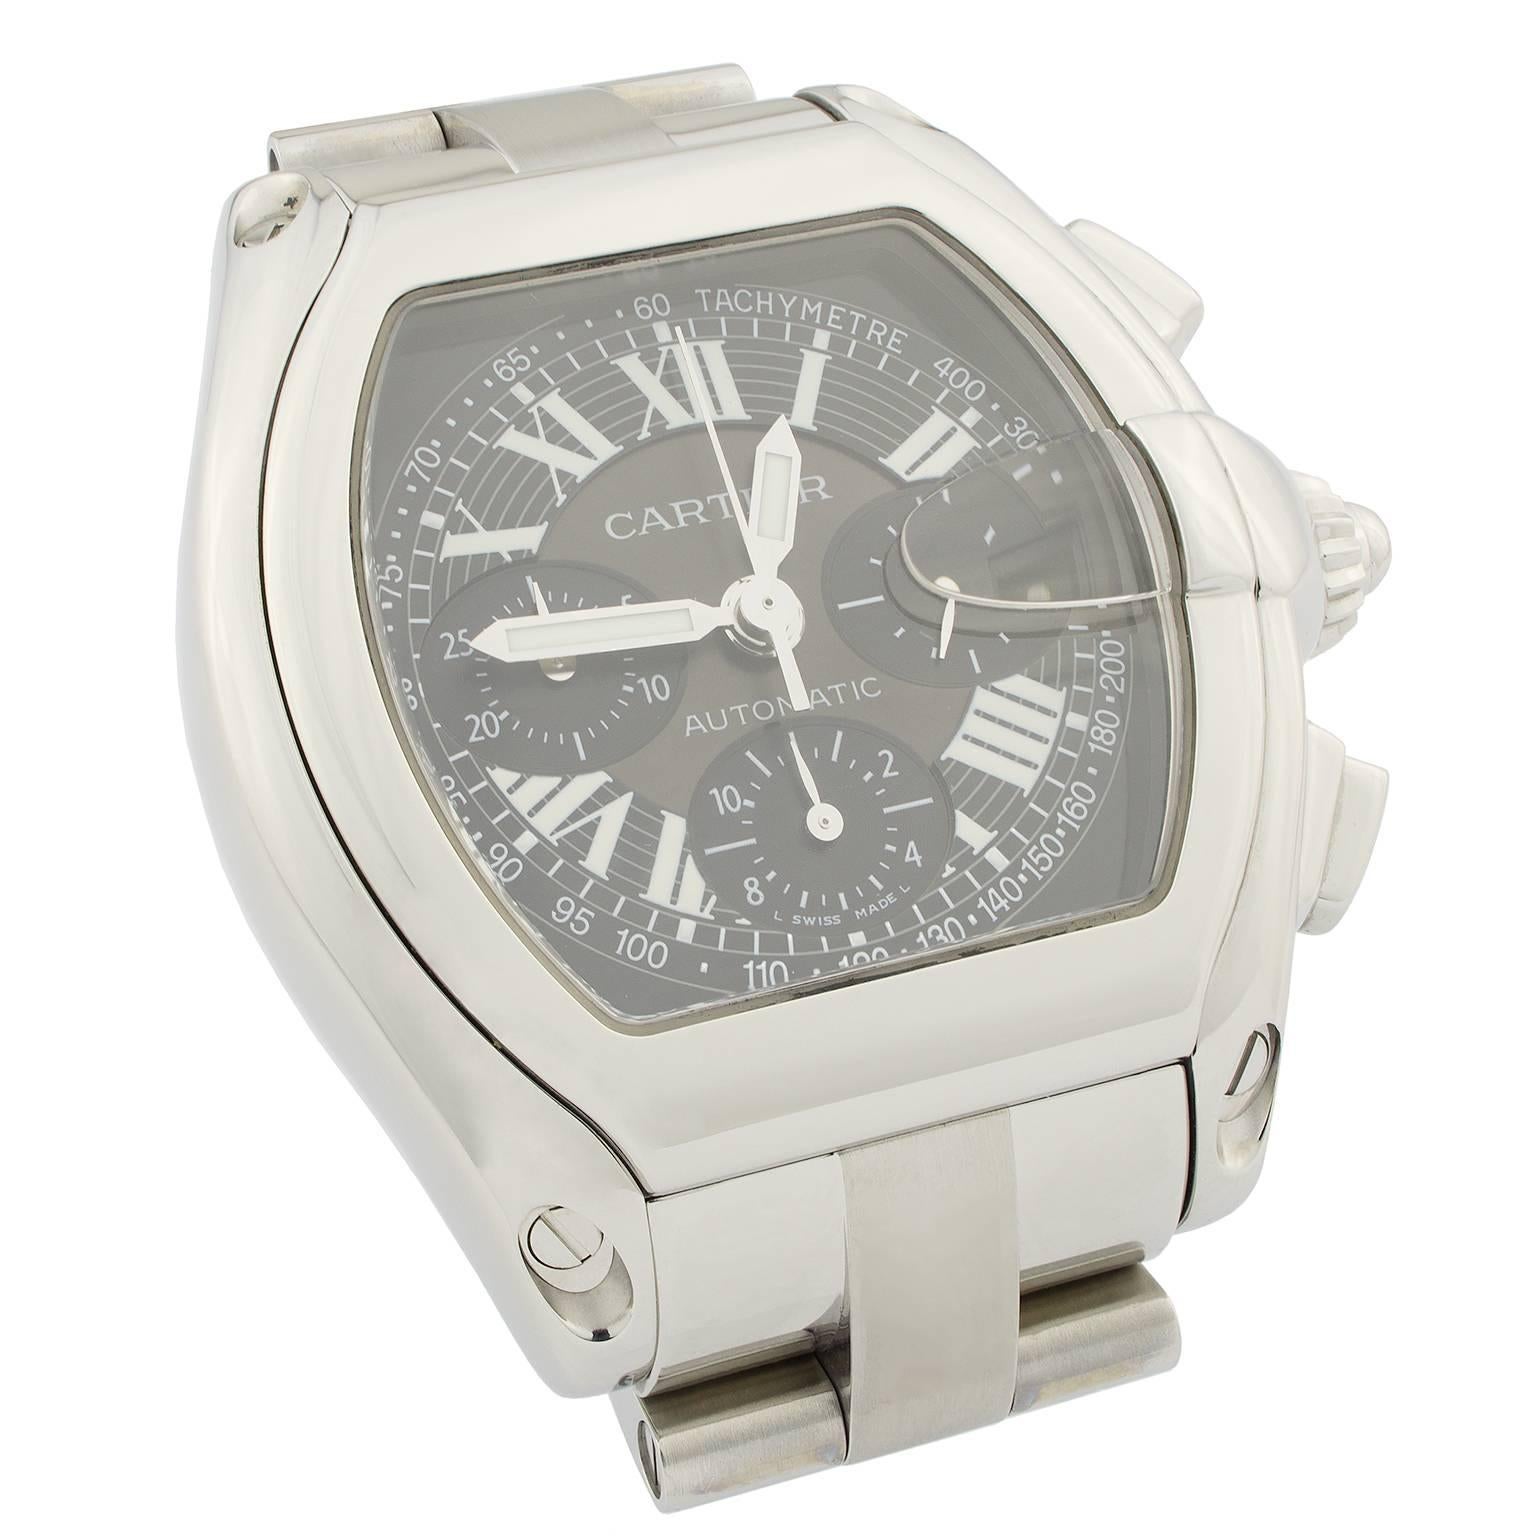 Automatic Cartier Roadster XL Chronograph wristwatch for men, in steel.